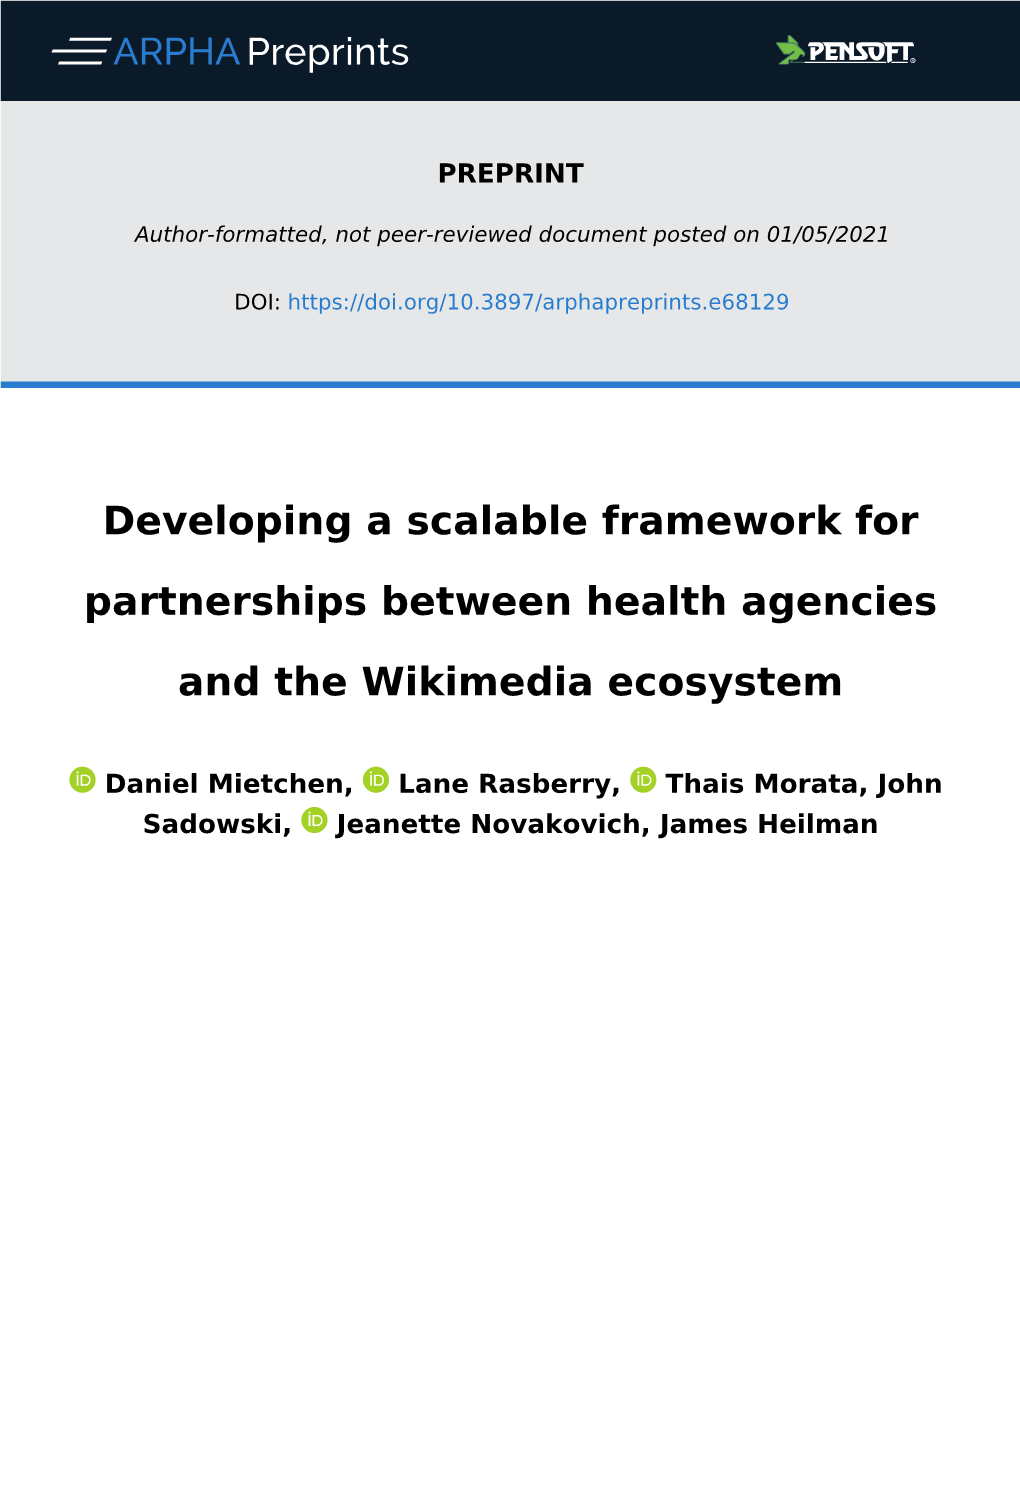 Developing a Scalable Framework for Partnerships Between Health Agencies